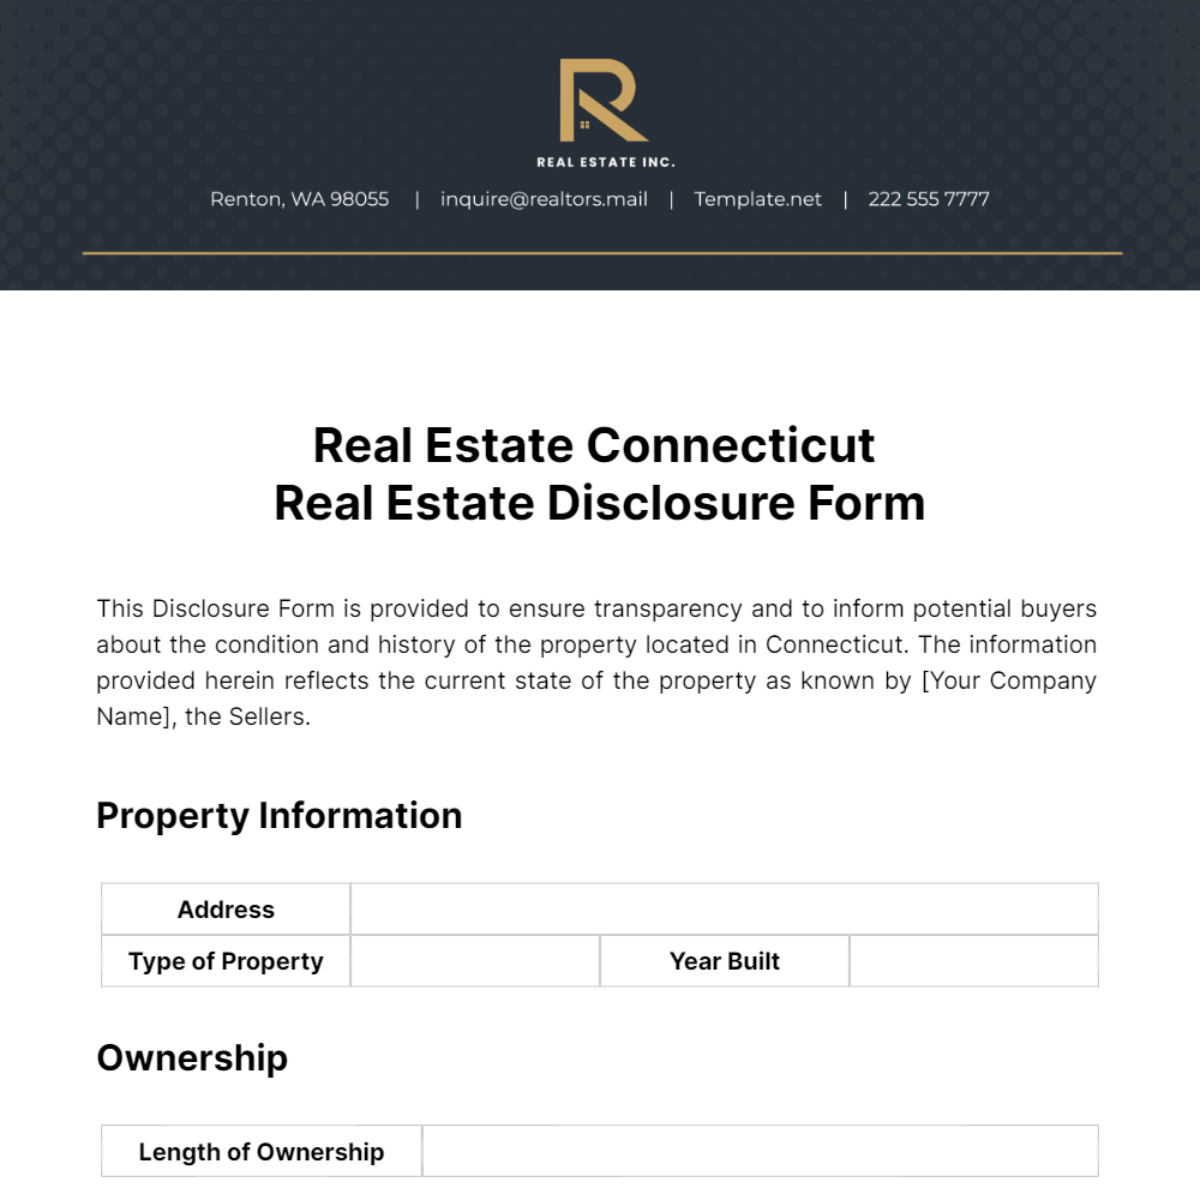 Real Estate Connecticut Real Estate Disclosure Form Template